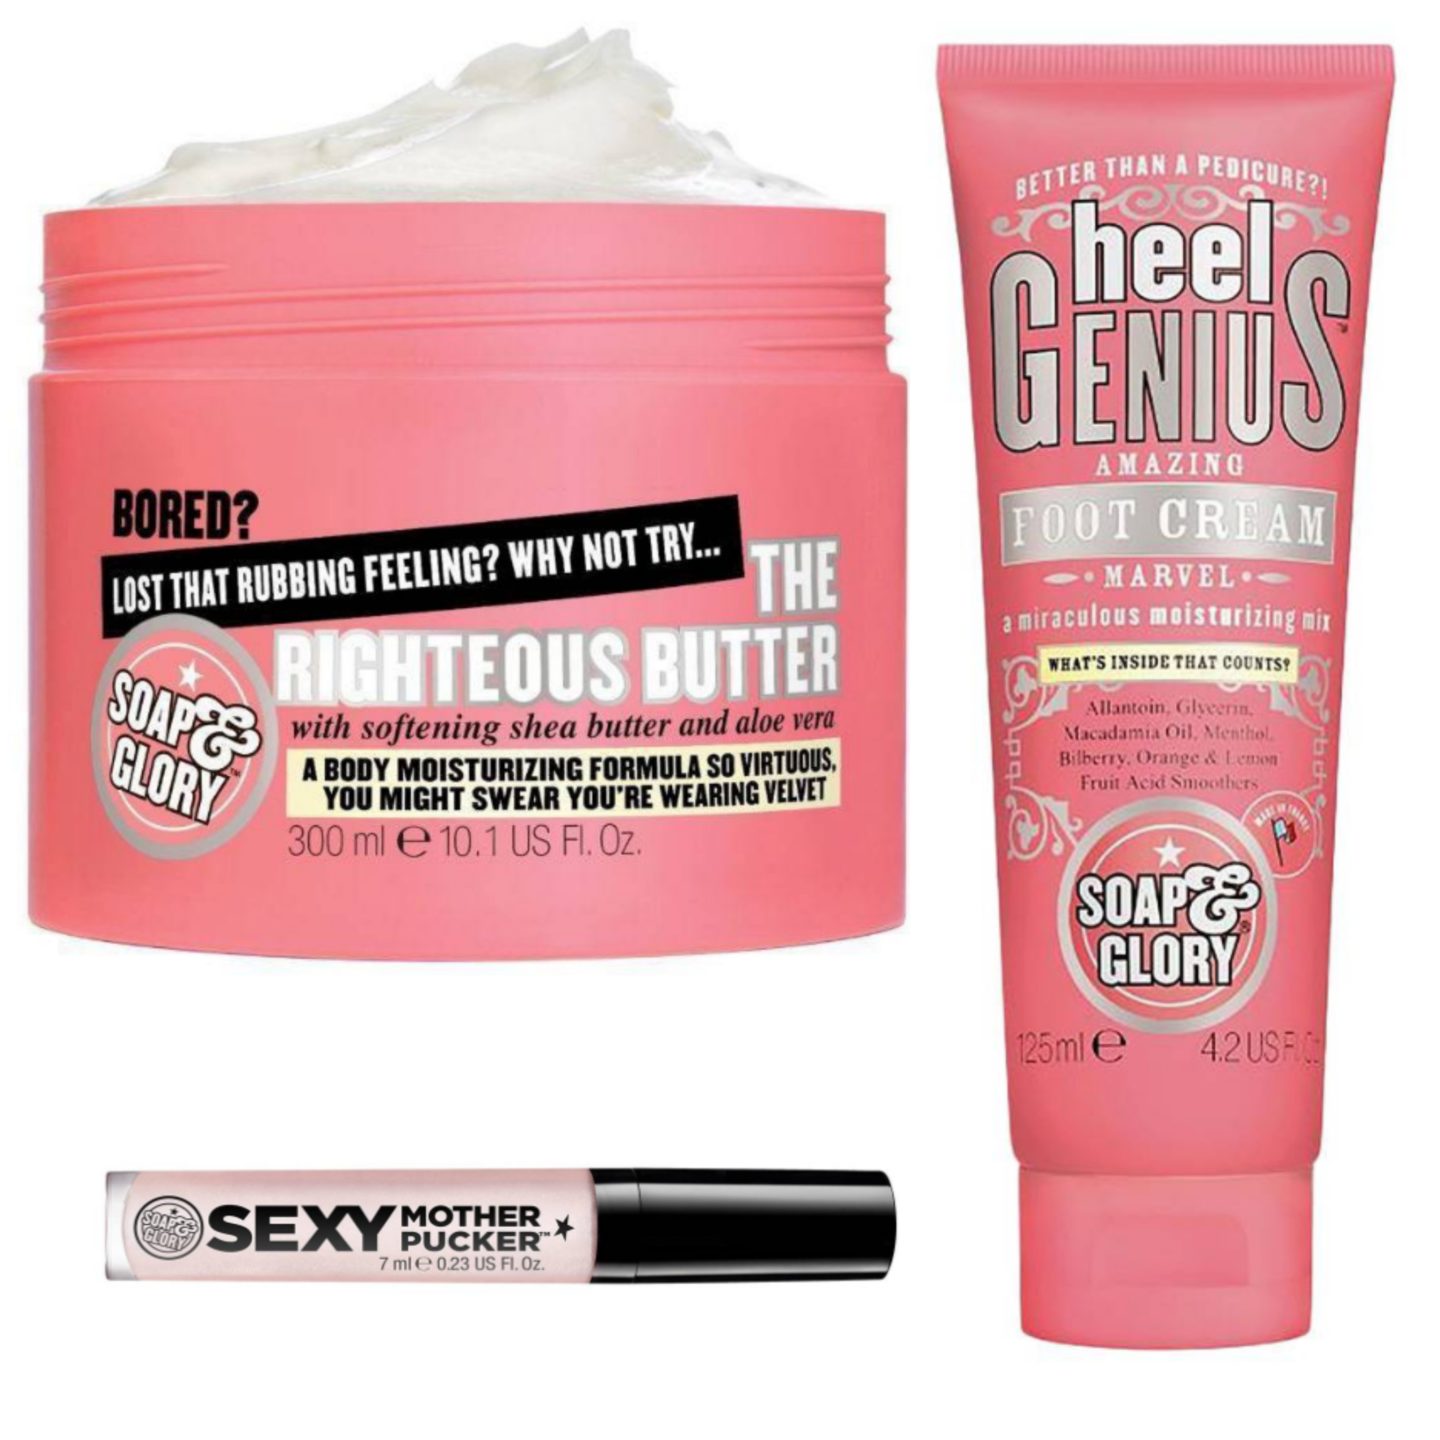 SOAP & GLORY PRODUCT REVIEW – SO GOOD, SO AFFORDABLE